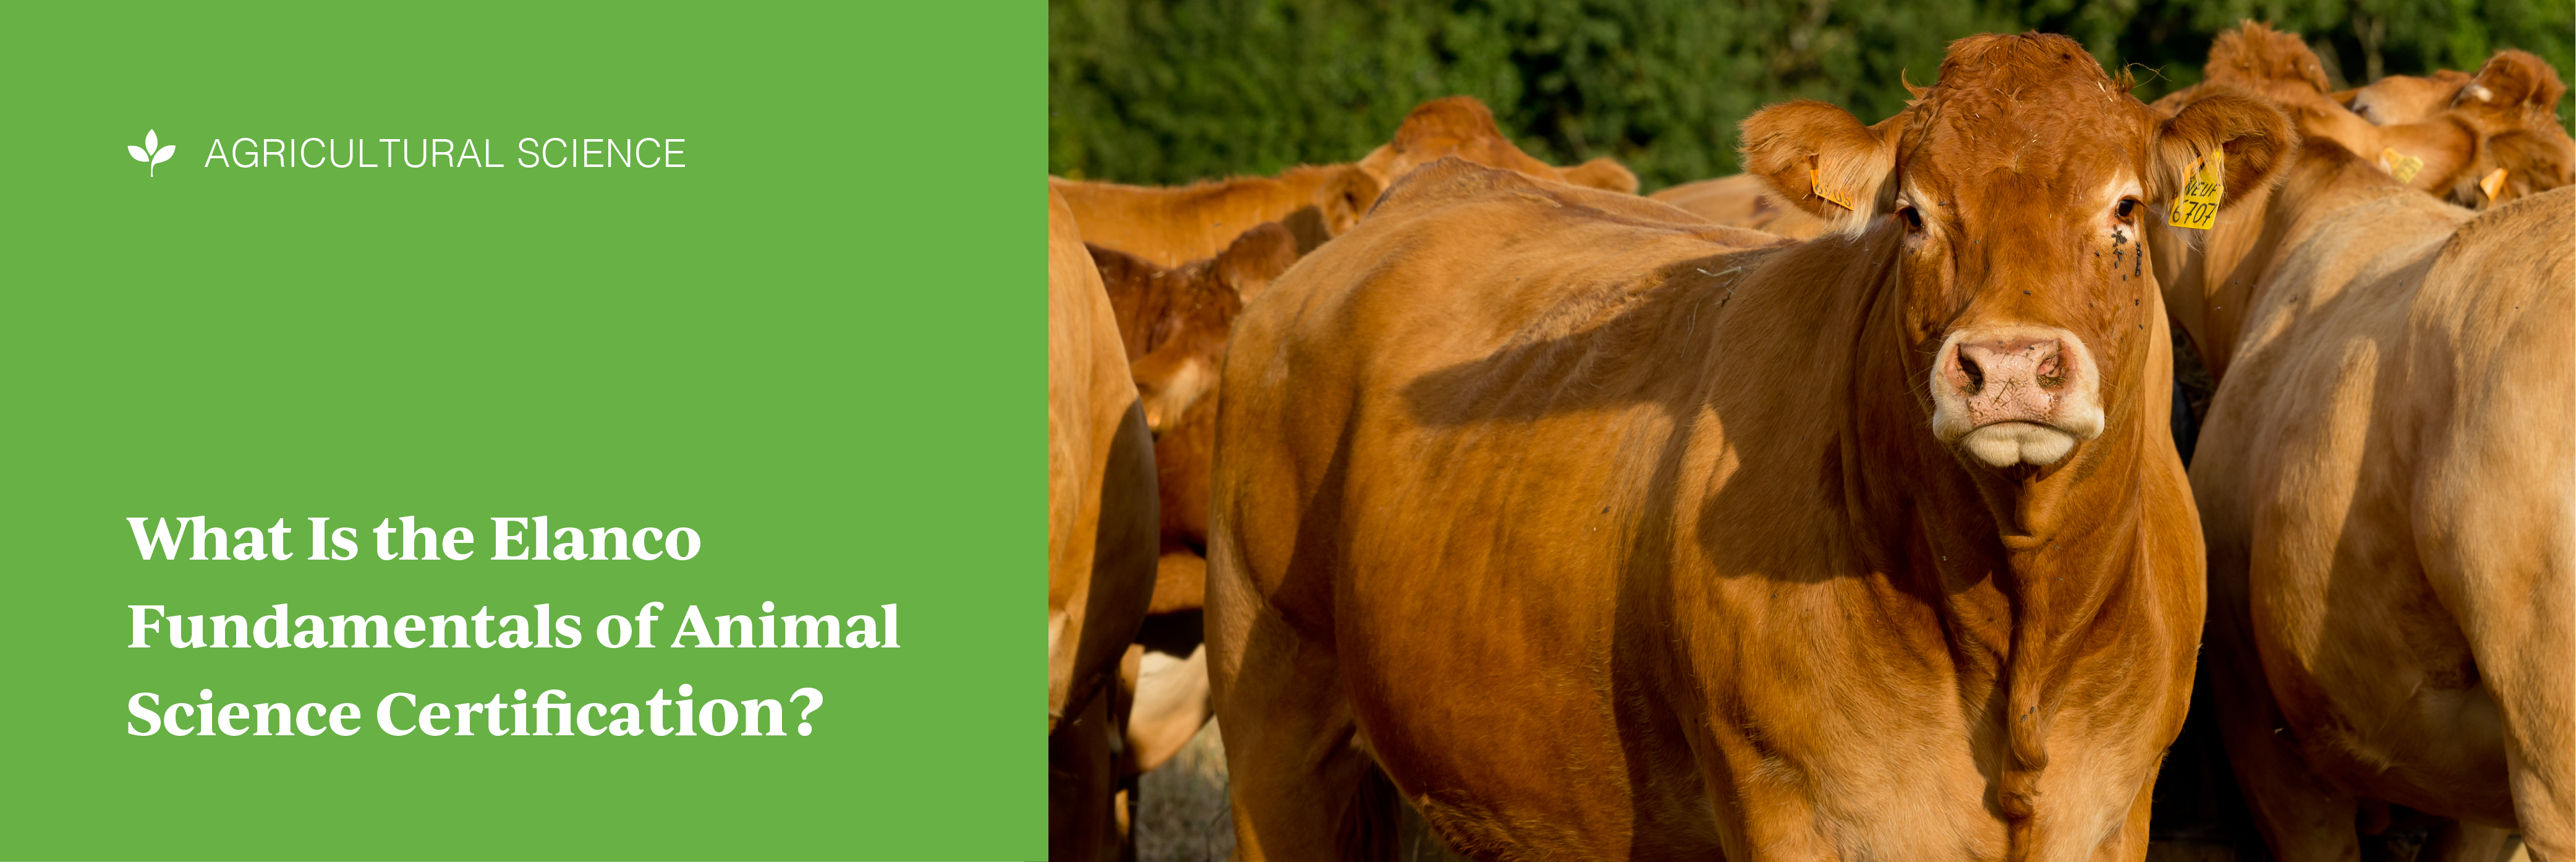 What Is the Elanco Fundamentals of Animal Science Certification?